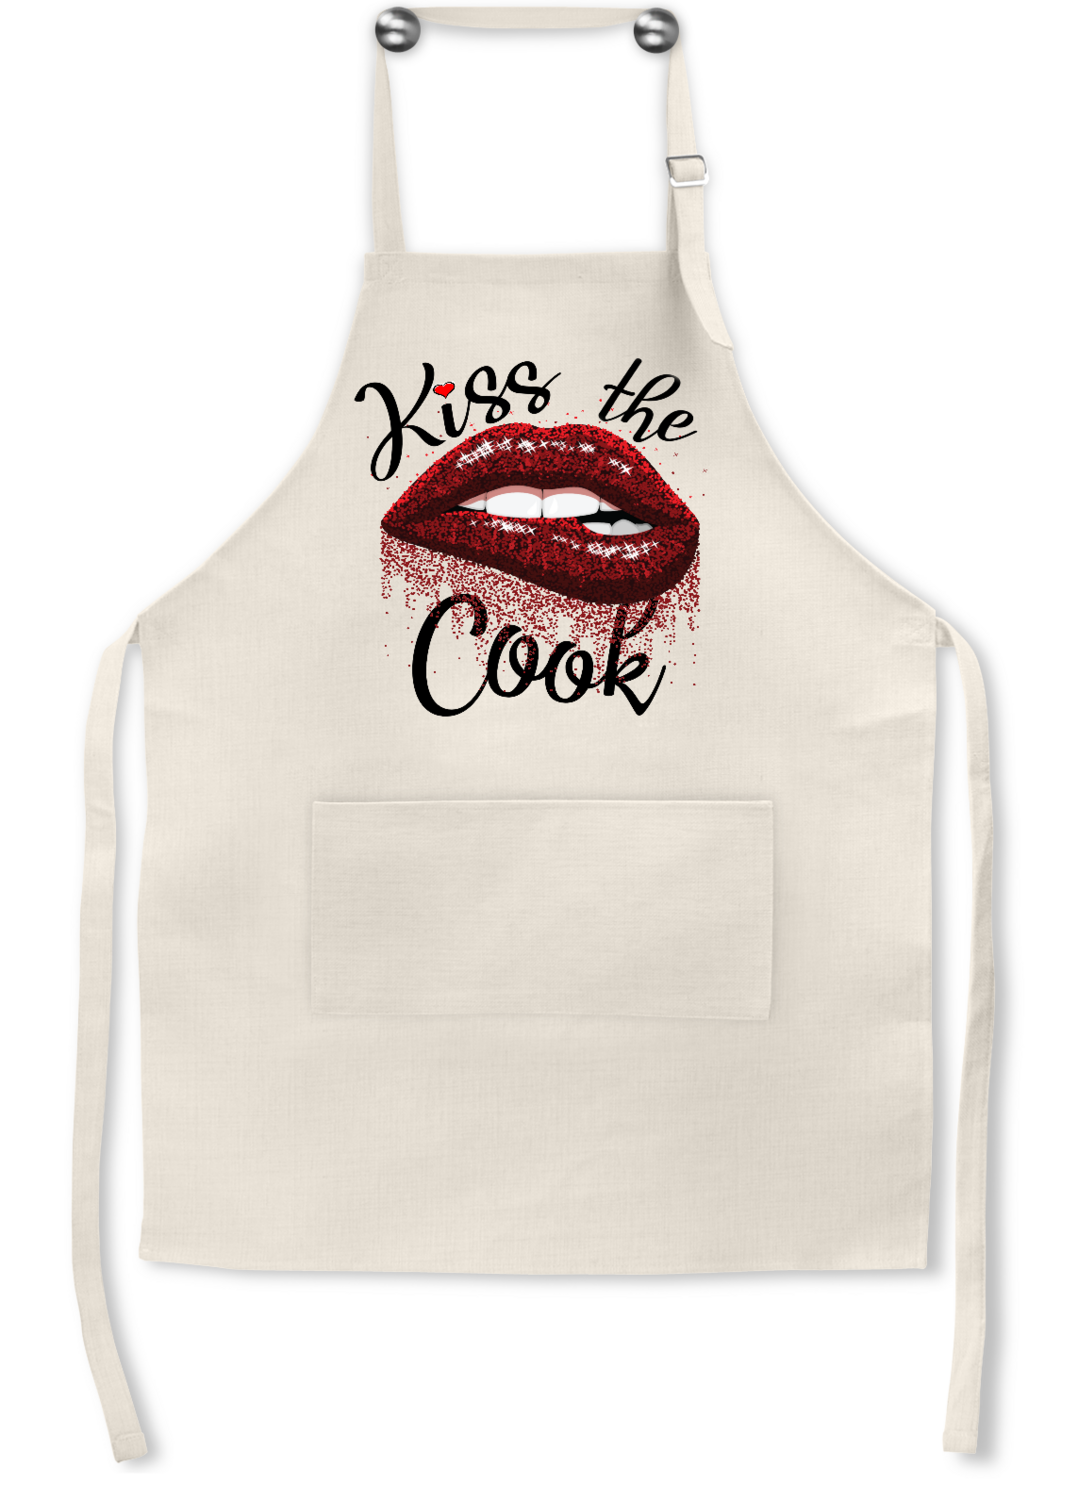 Apron: KISS THE COOK